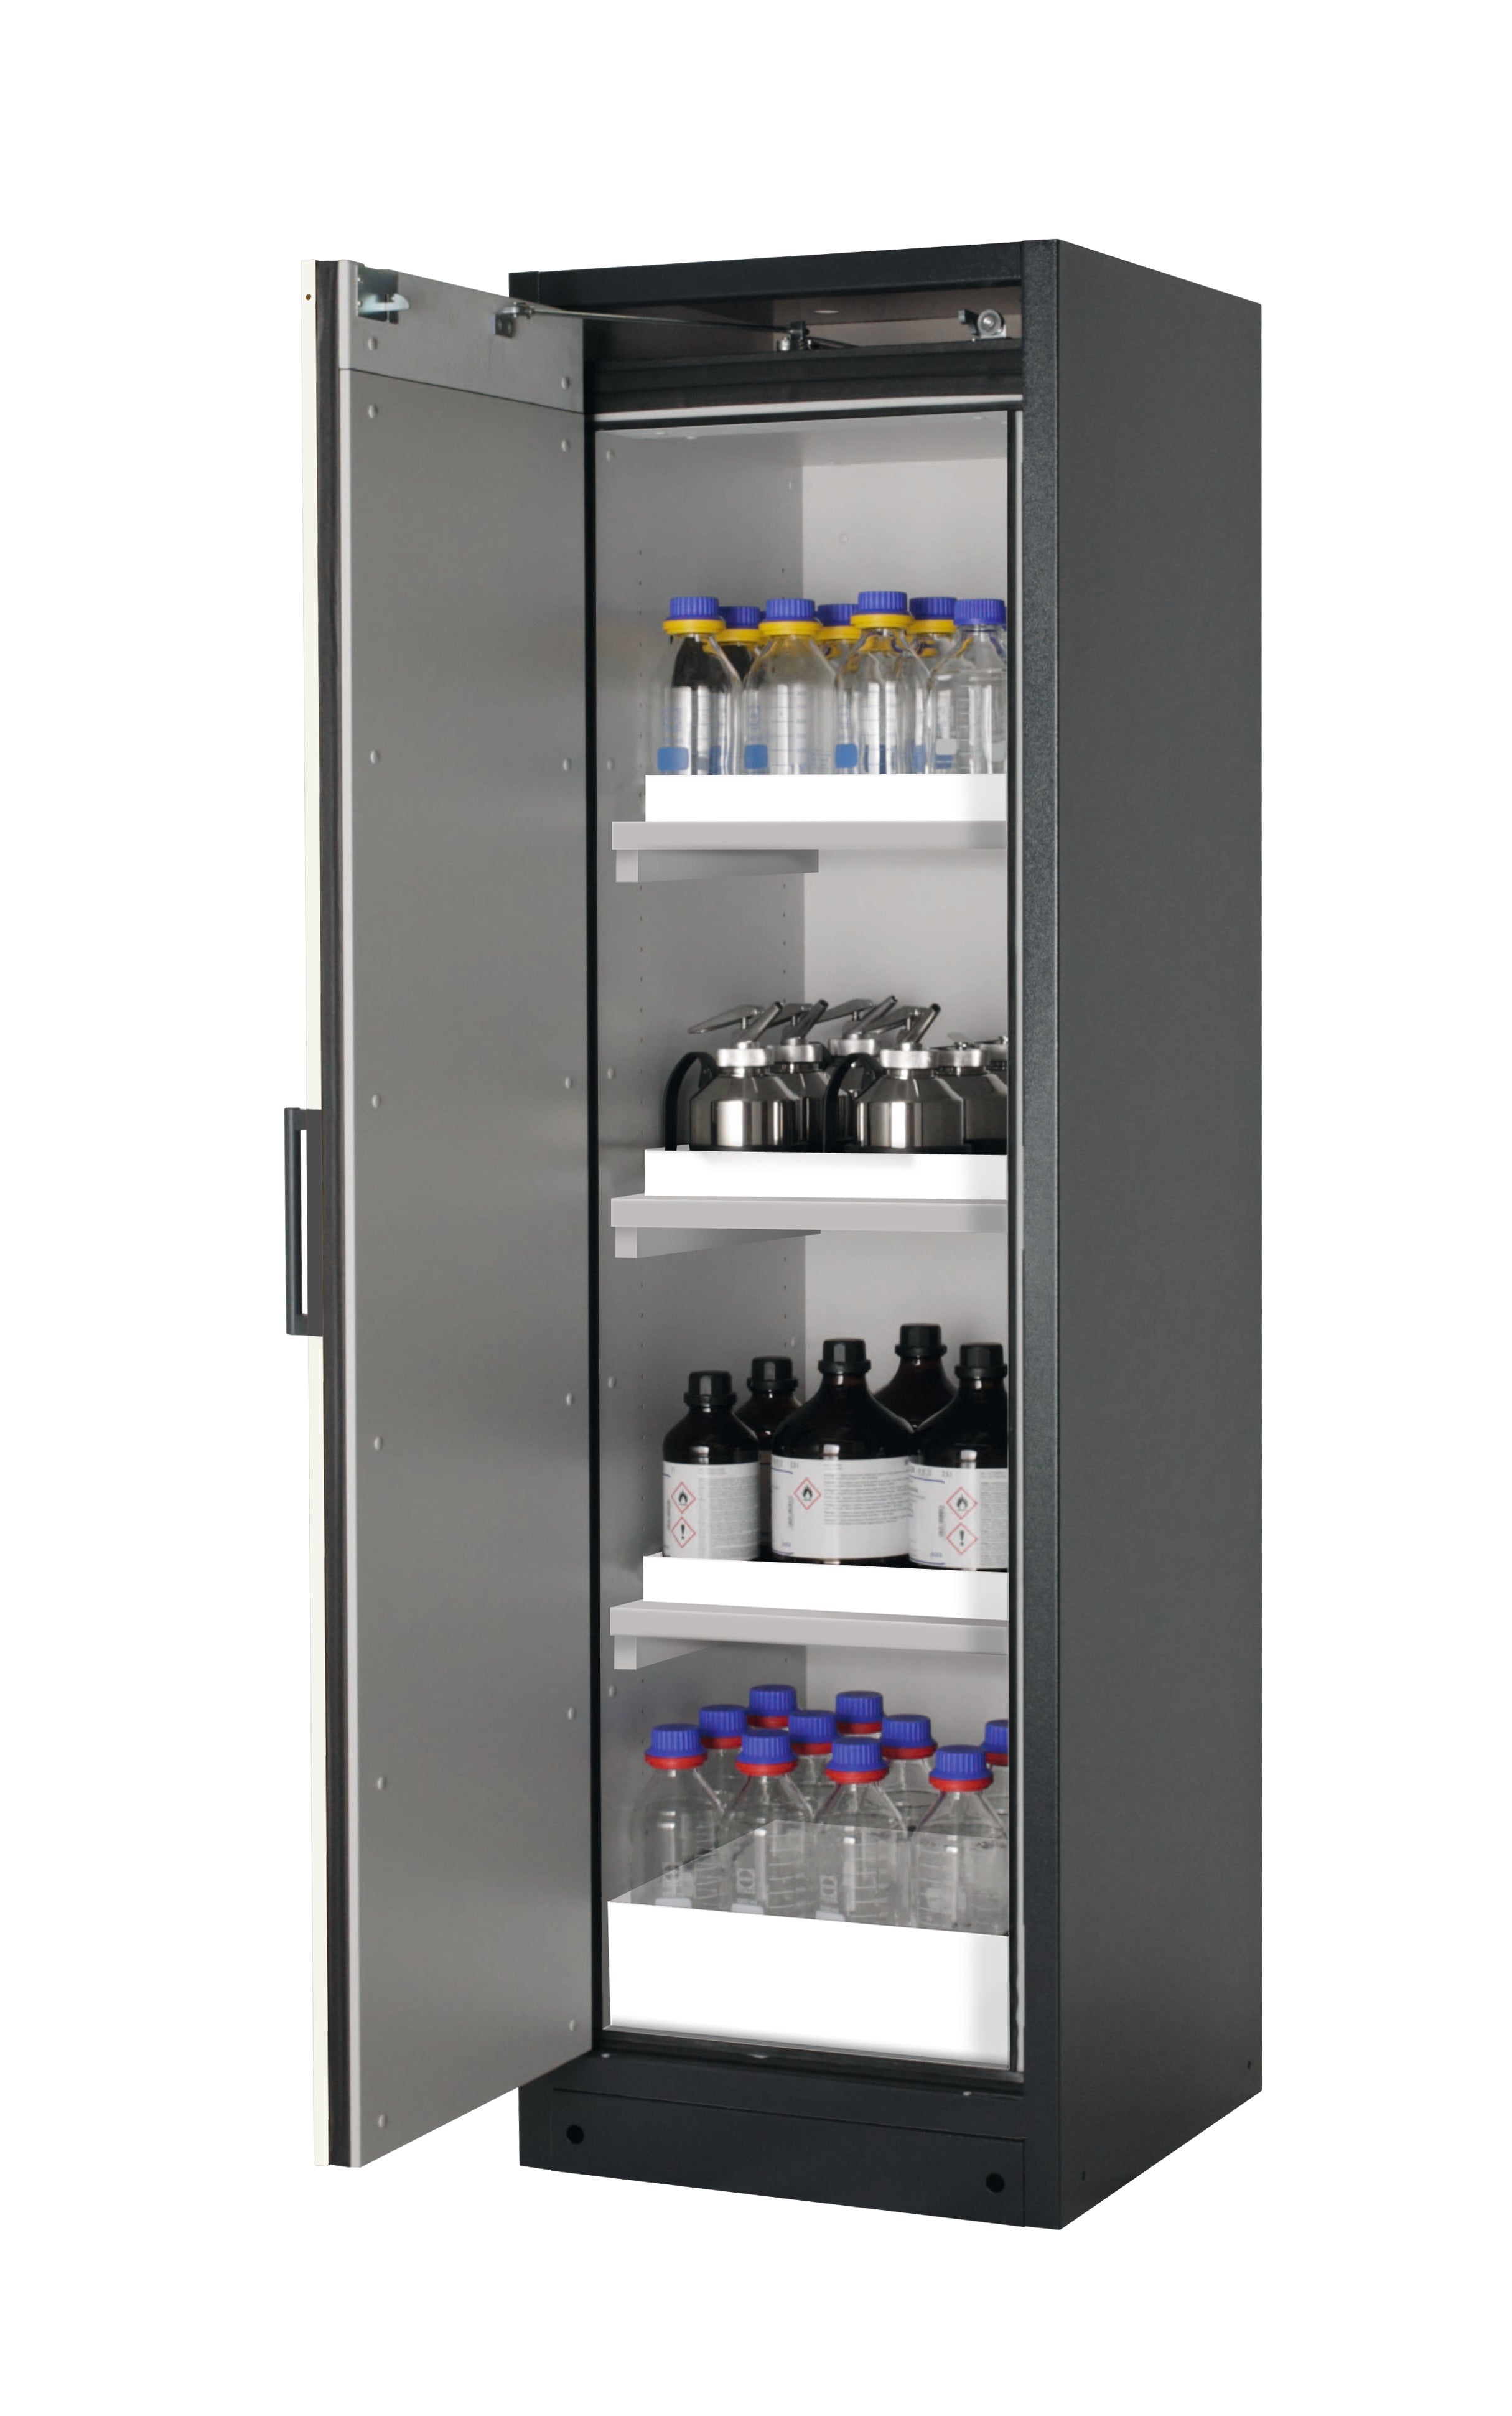 Type 90 safety storage cabinet Q-CLASSIC-90 model Q90.195.060 in asecos silver with 3x tray shelf (standard) (polypropylene),